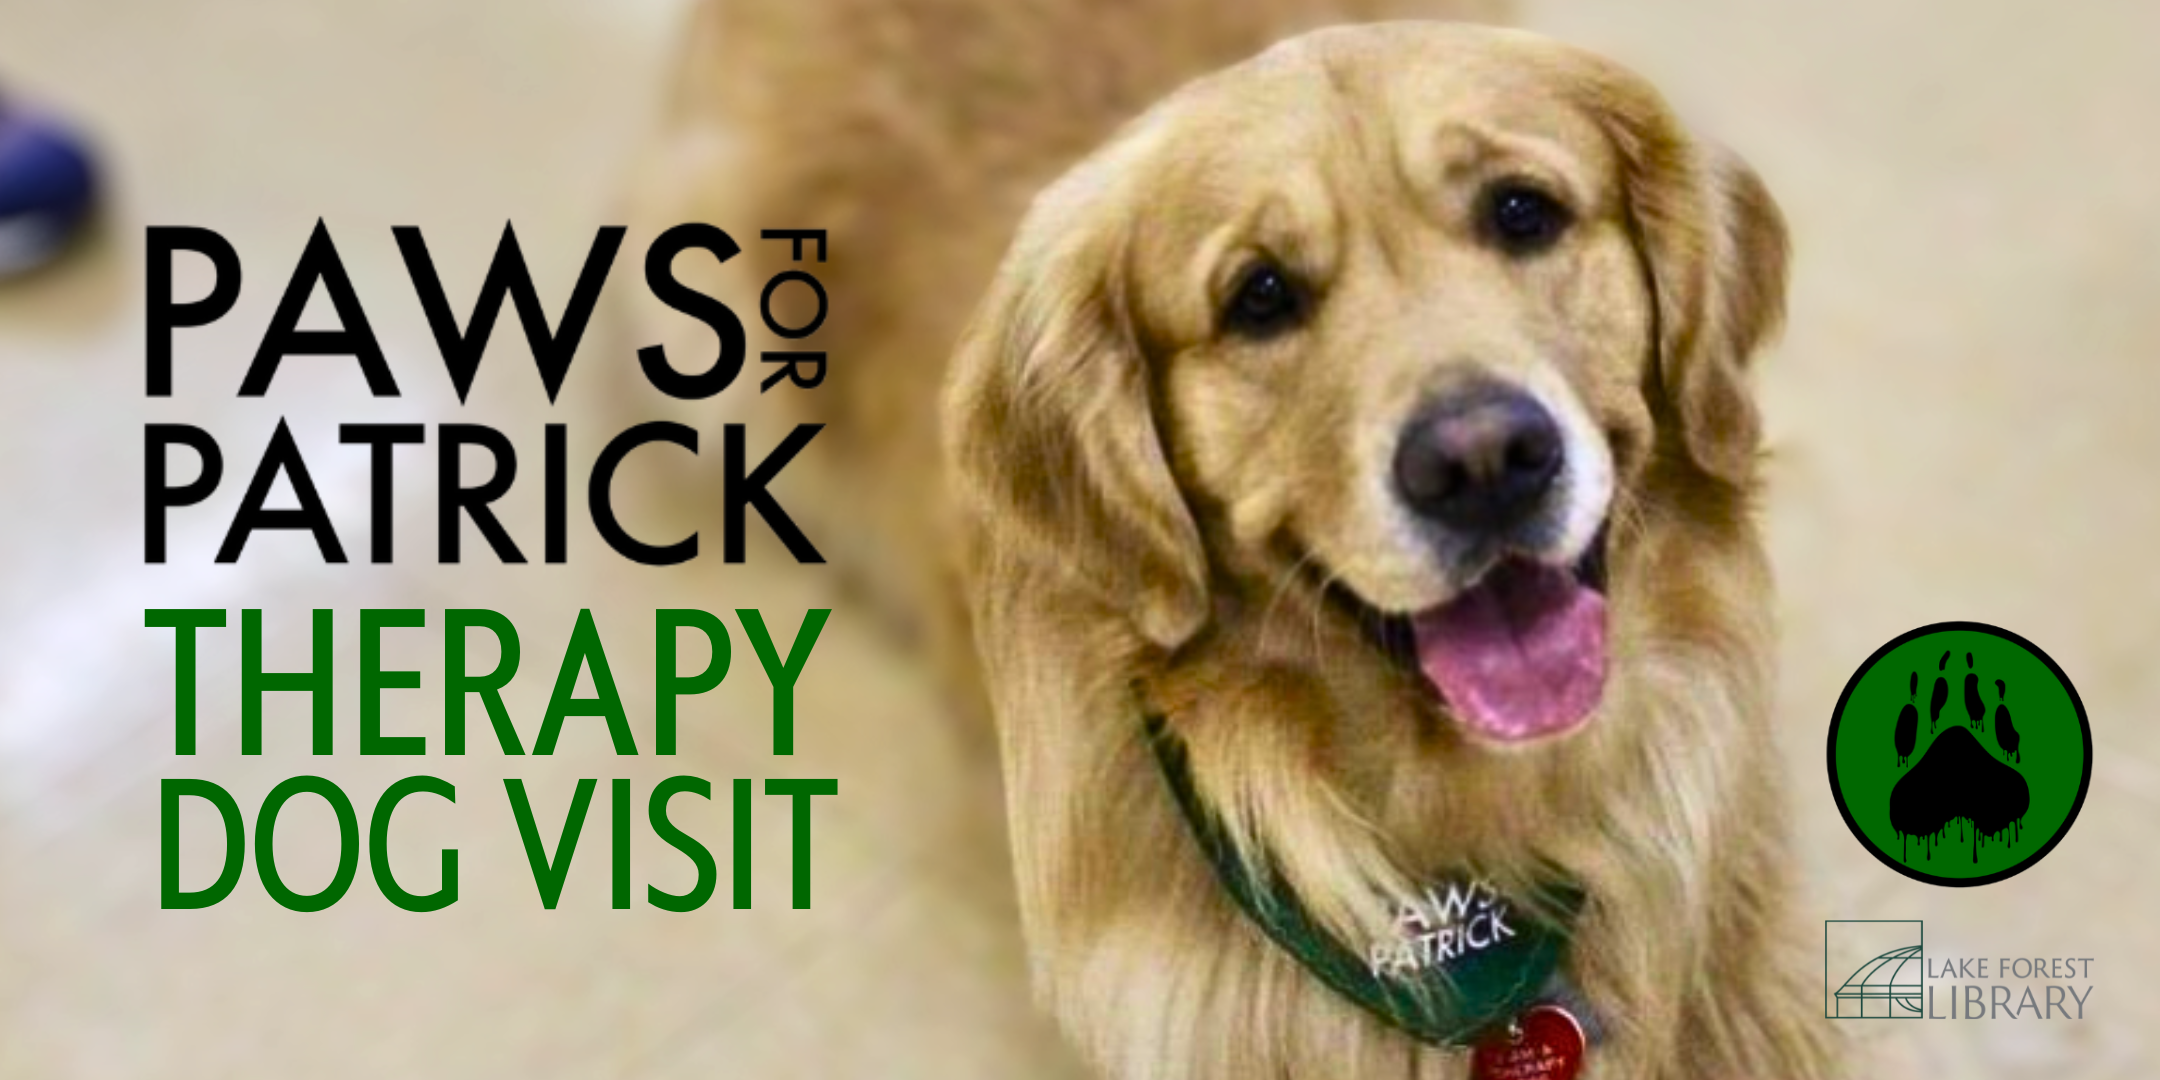 image of "Paws for Patrick Therapy Dog Visit"